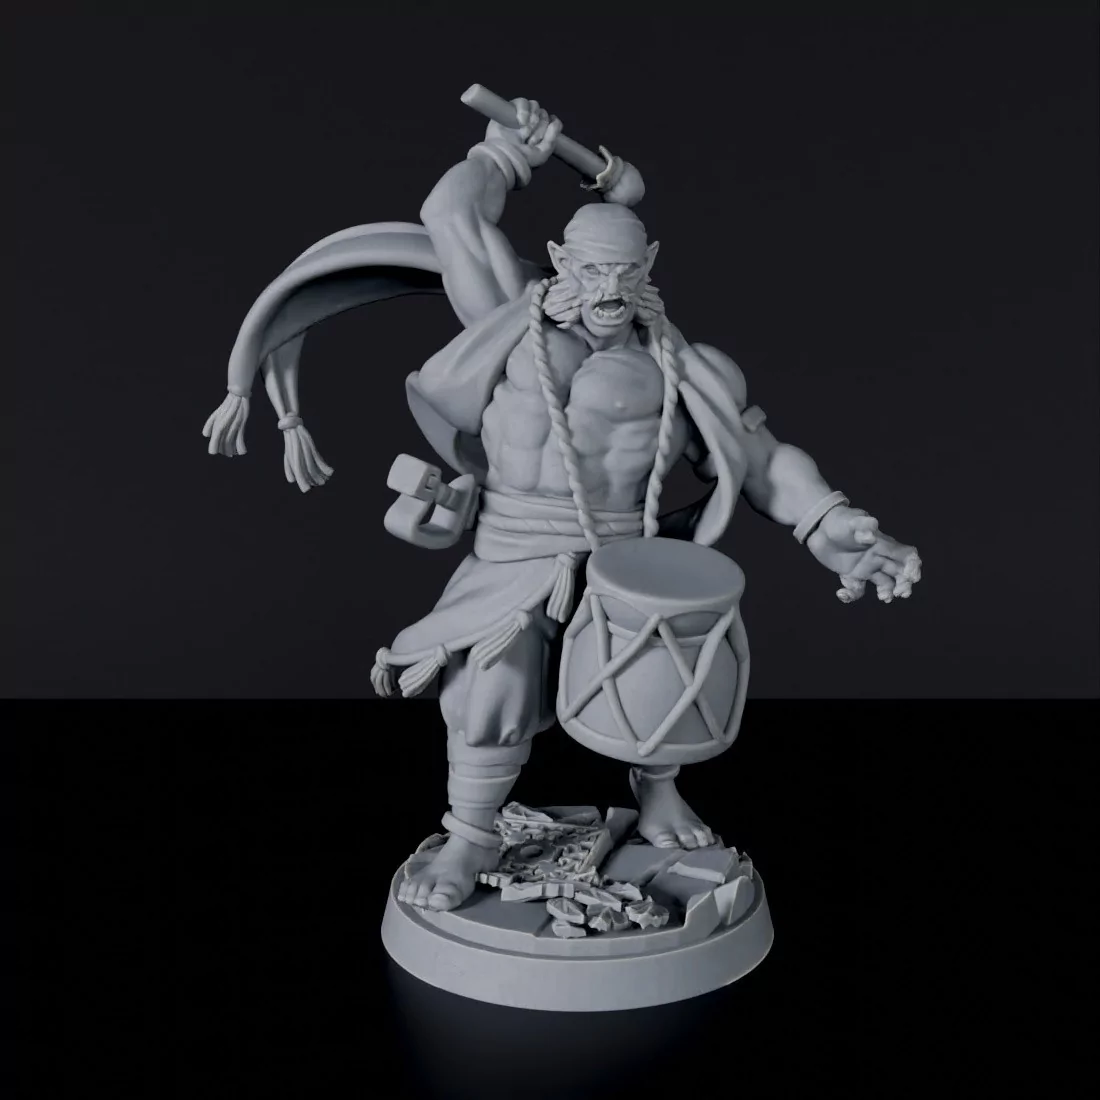 Miniature of Half-Orc Male Bard with sword for fantasy tabletop role-playing games